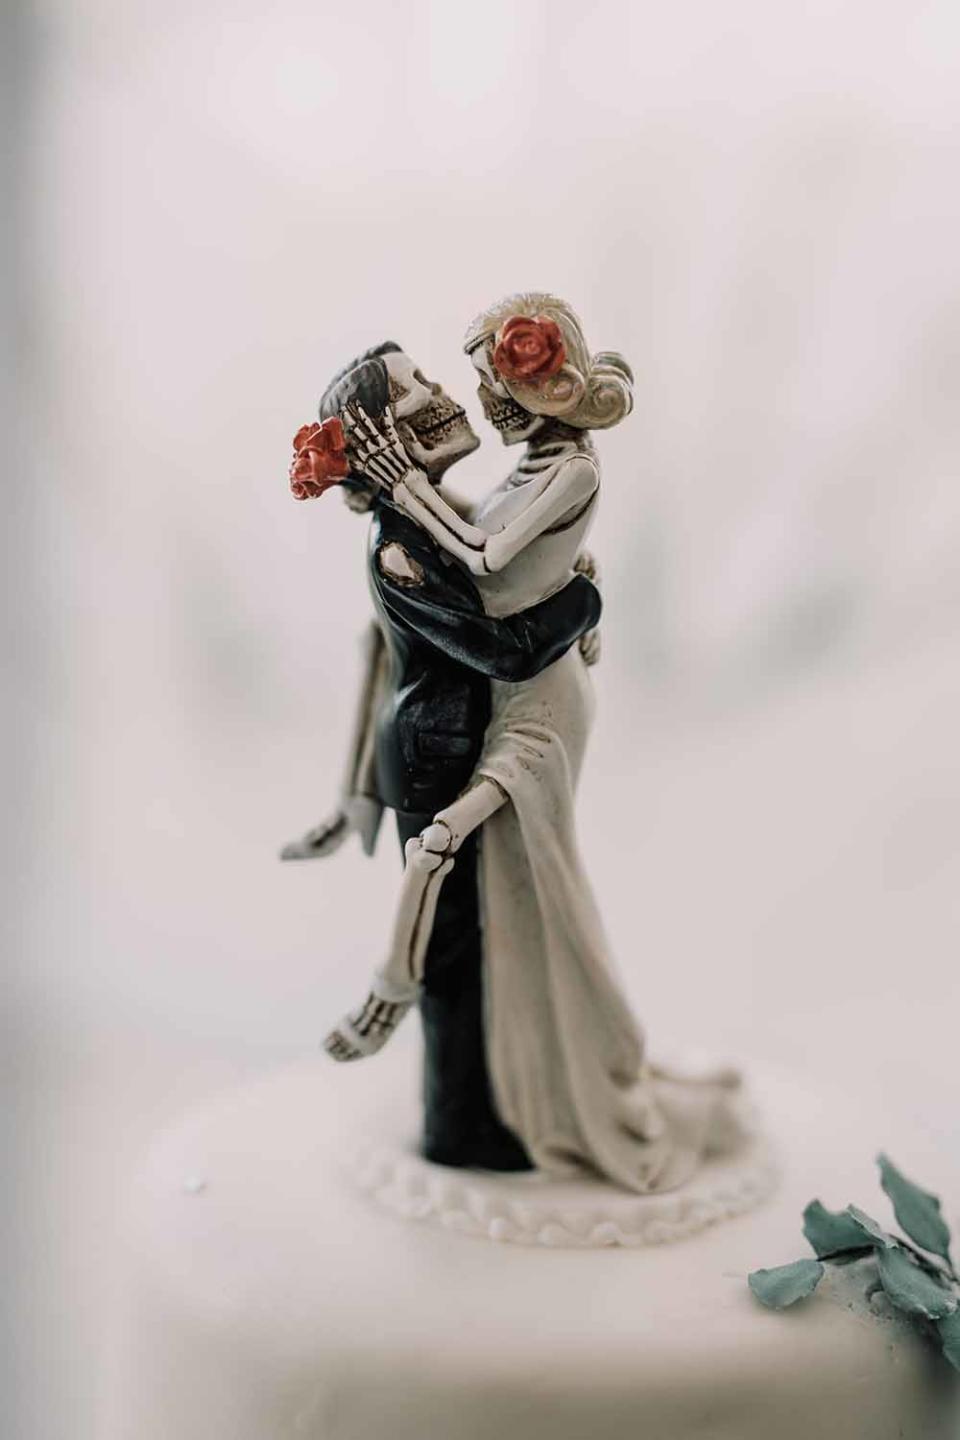 The skull groom and bride really were the icing on the cake. (The Kensington Photographer LTD/PA Real Life)